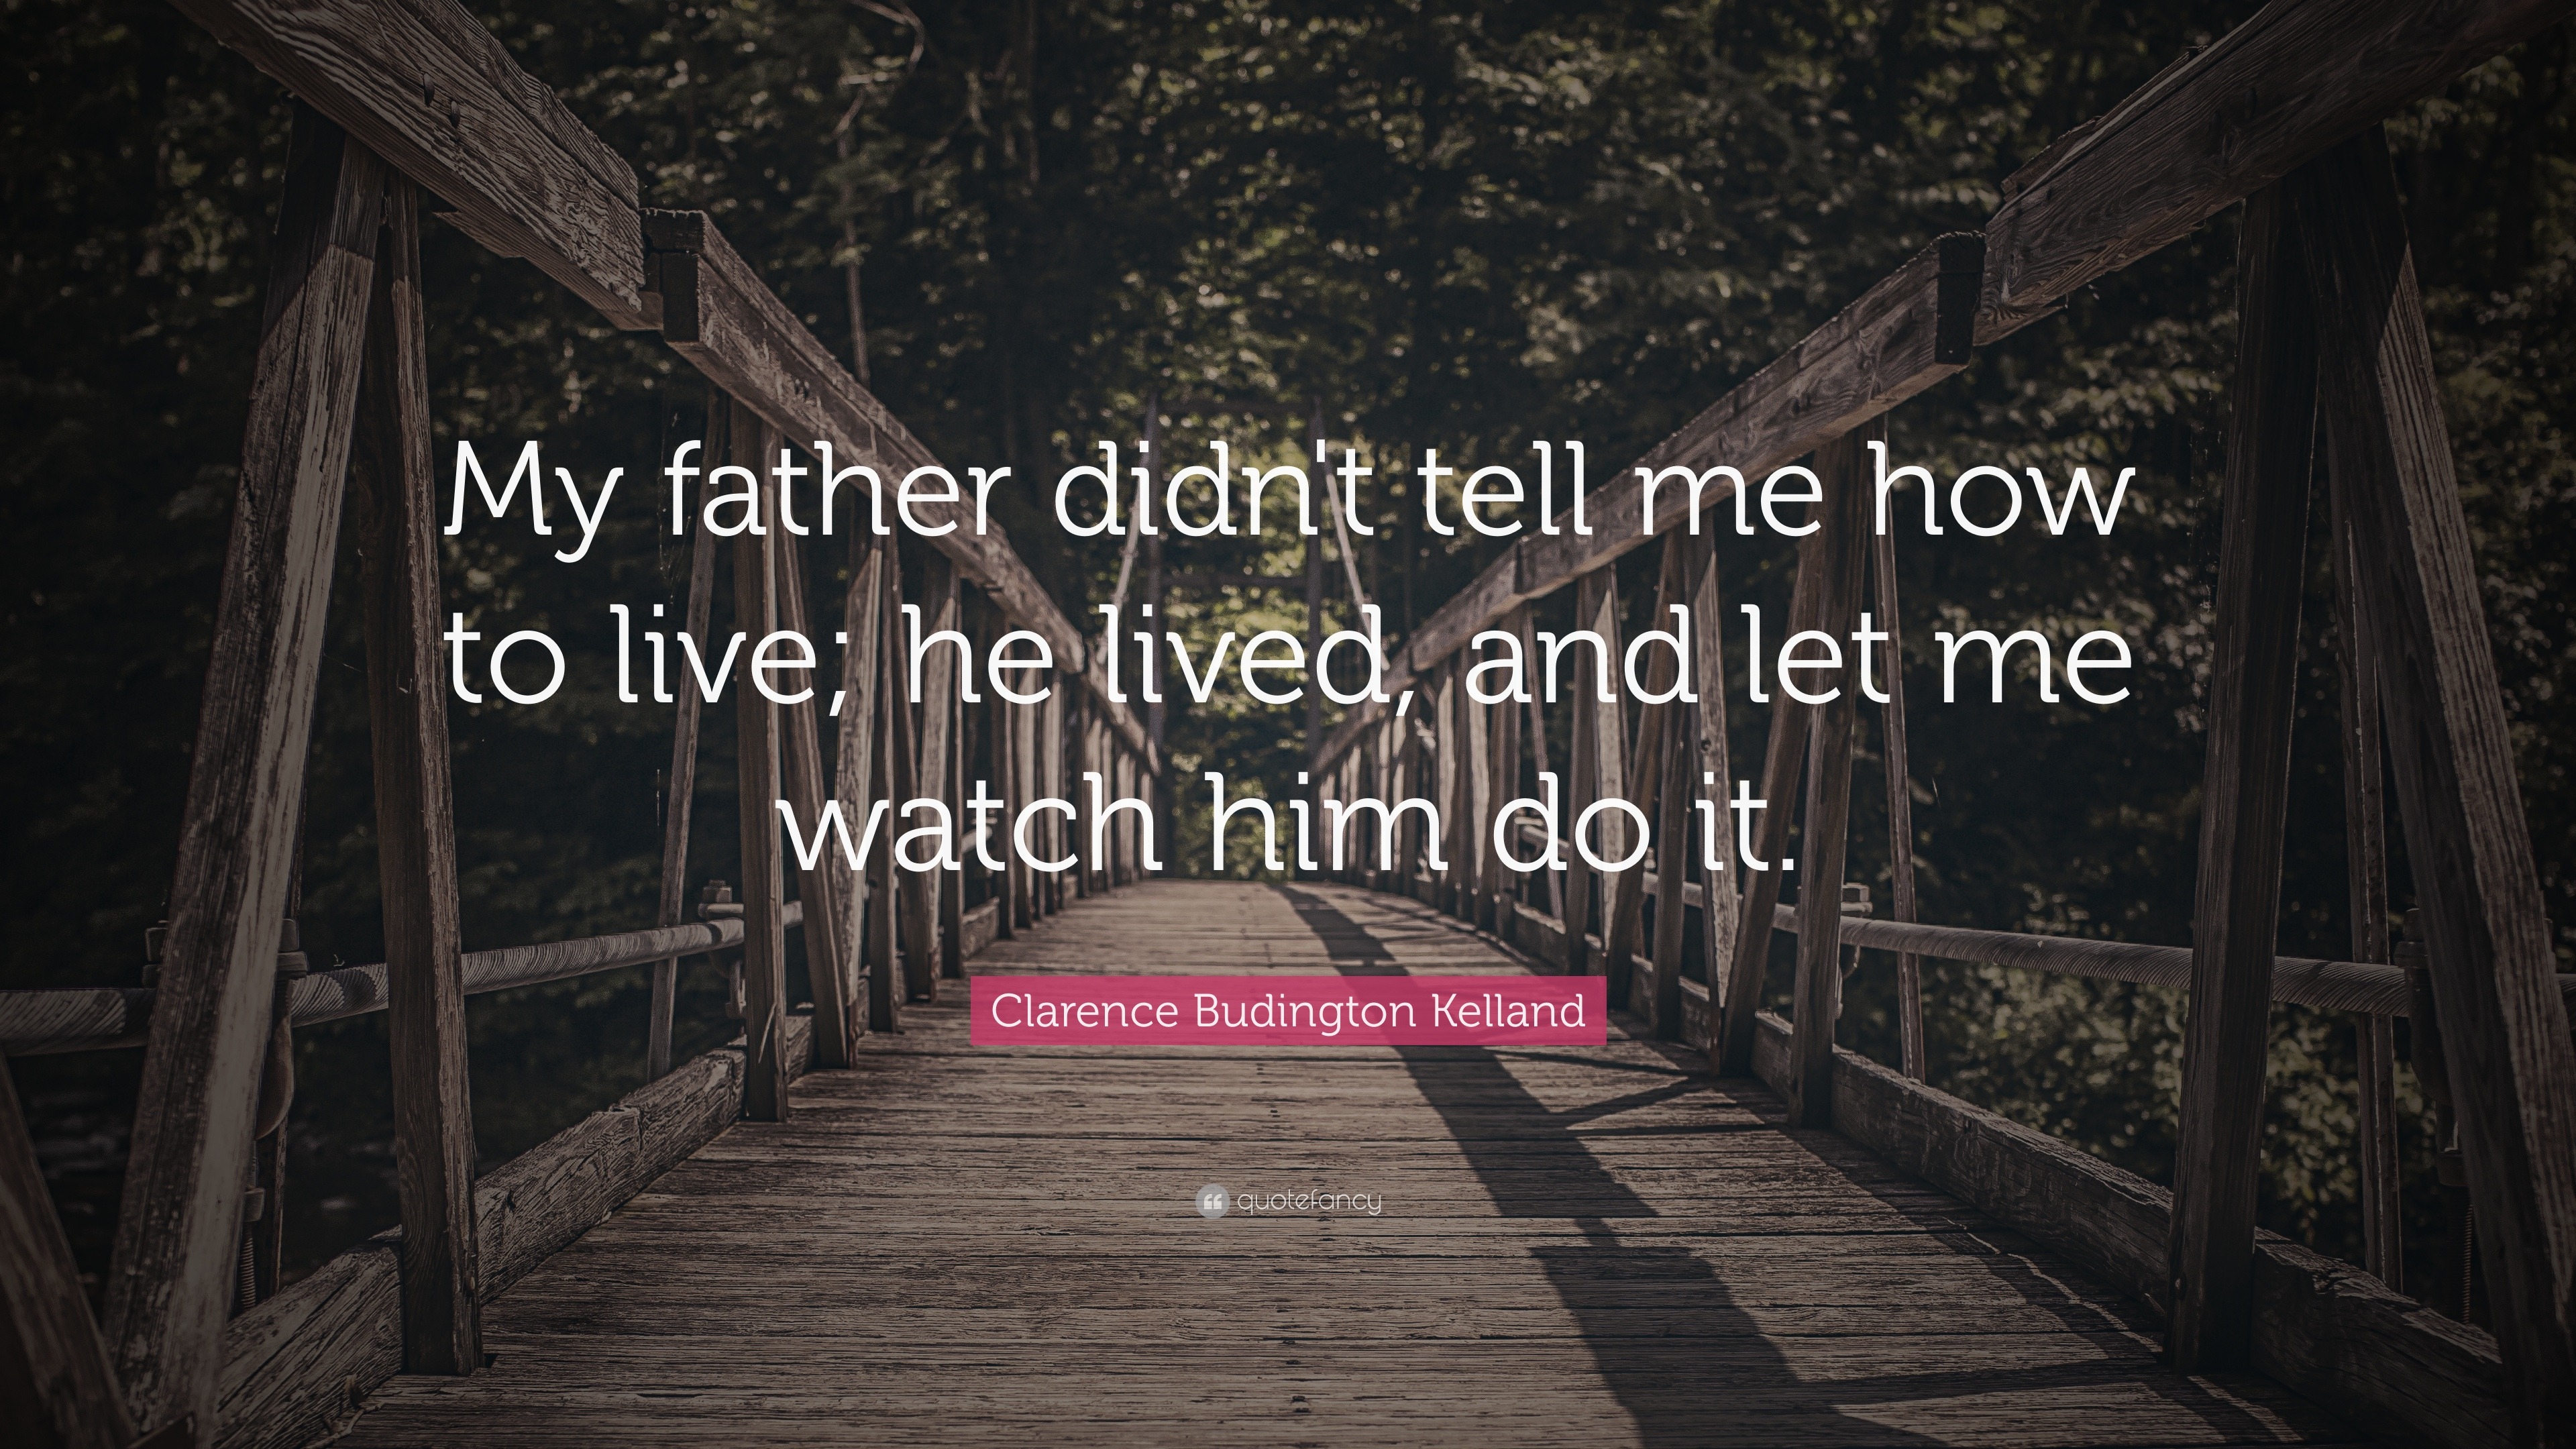 Clarence Budington Kelland Quote: “My father didn't tell me how to live